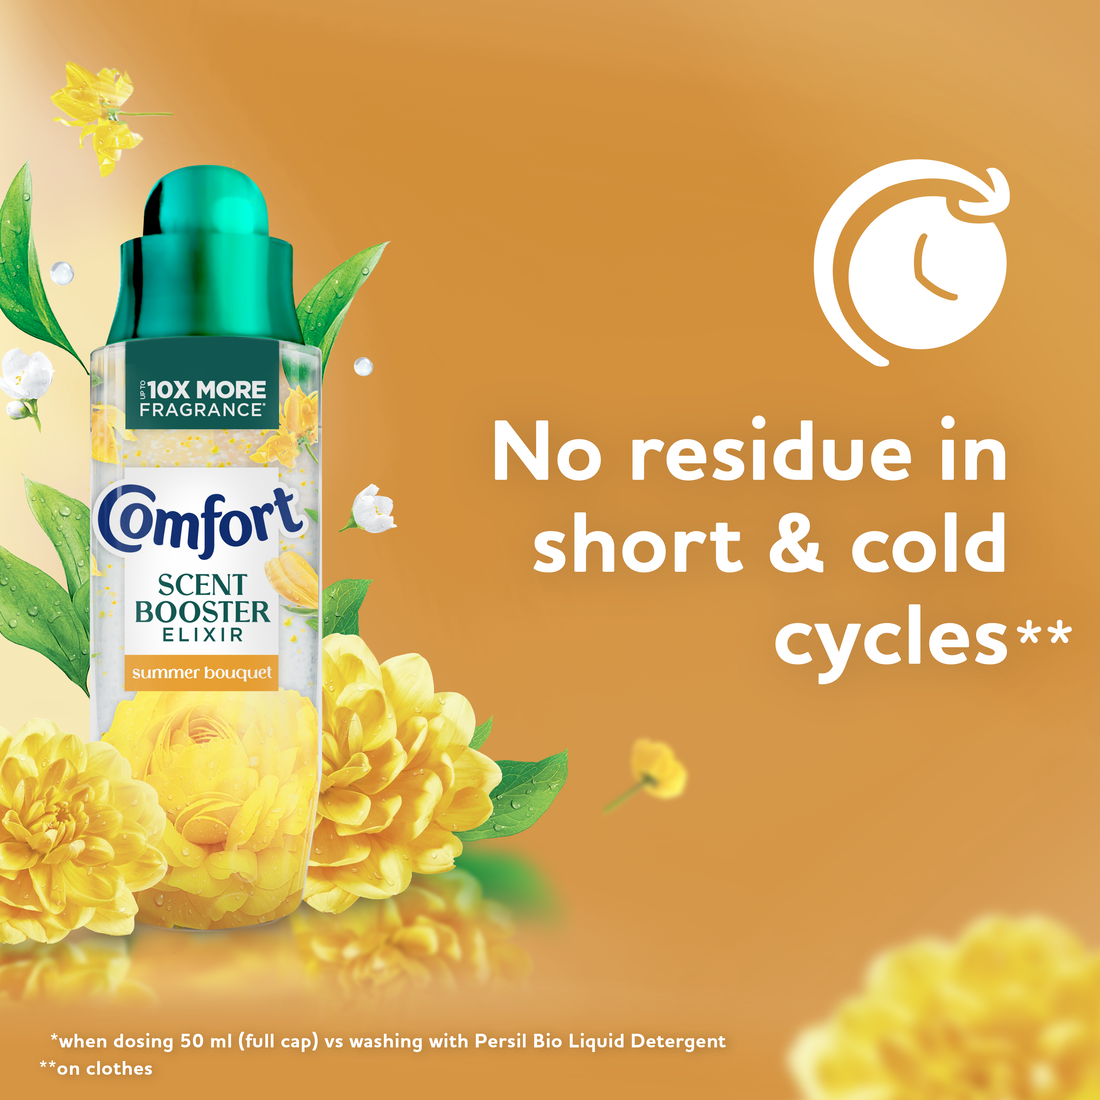 No residue in short and cold cycles

*when dosing 50ml (full cap) vs washing with Persil Bio Liquid Detergent
**on clothes